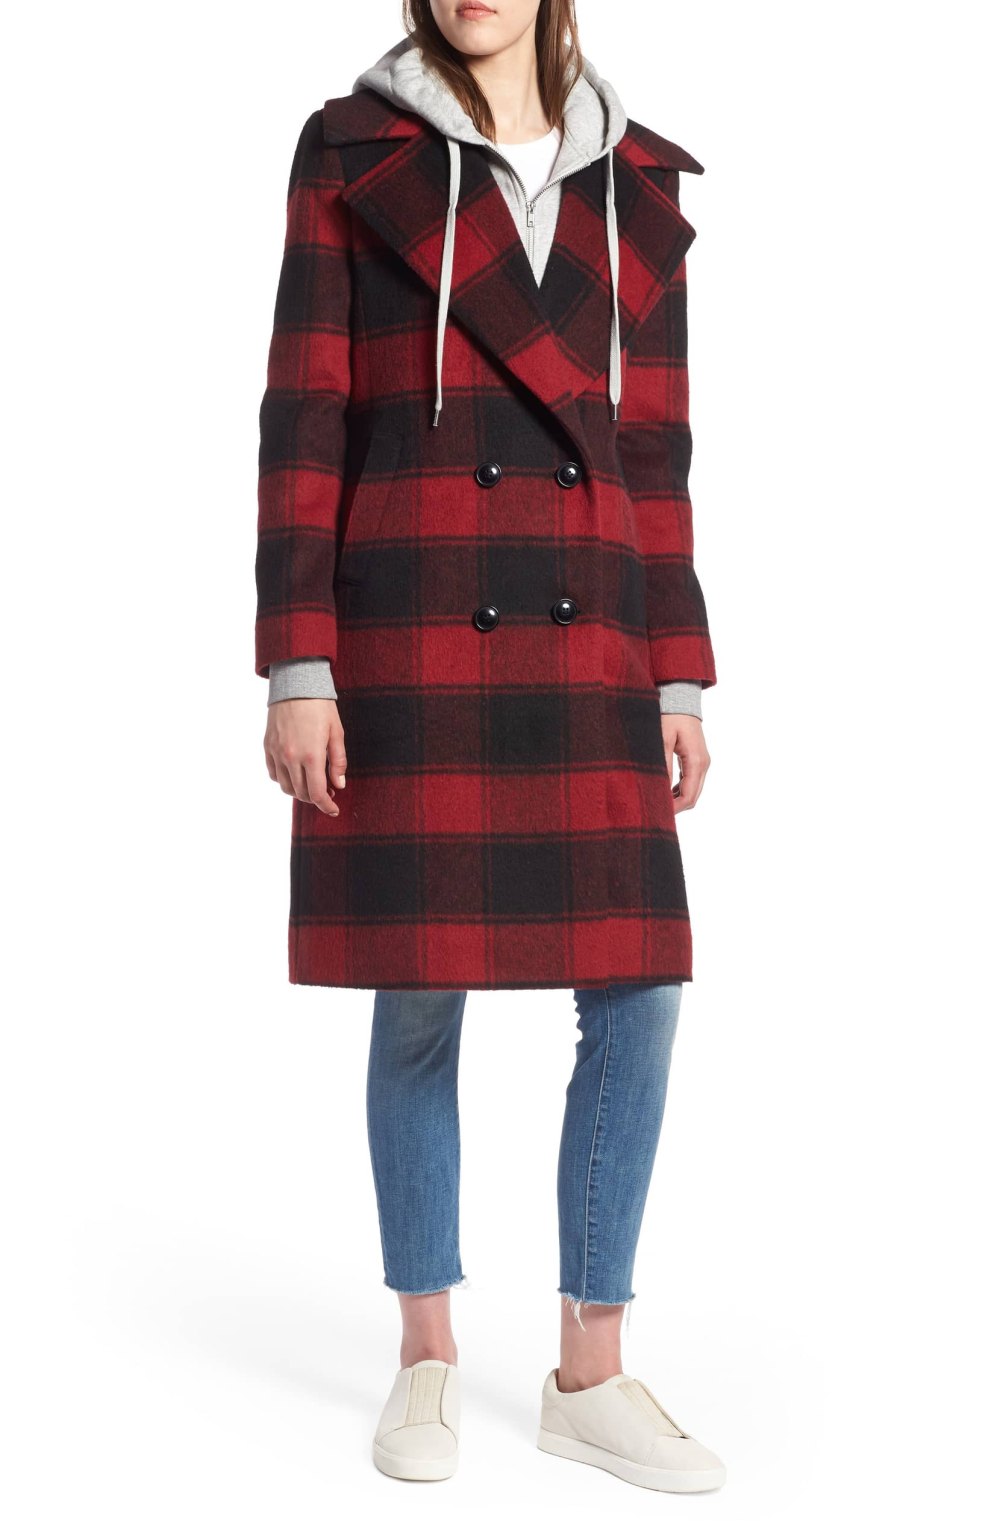 Shop This Pretty Plaid Coat From Kendall and Kylie Jenner's Clothing ...